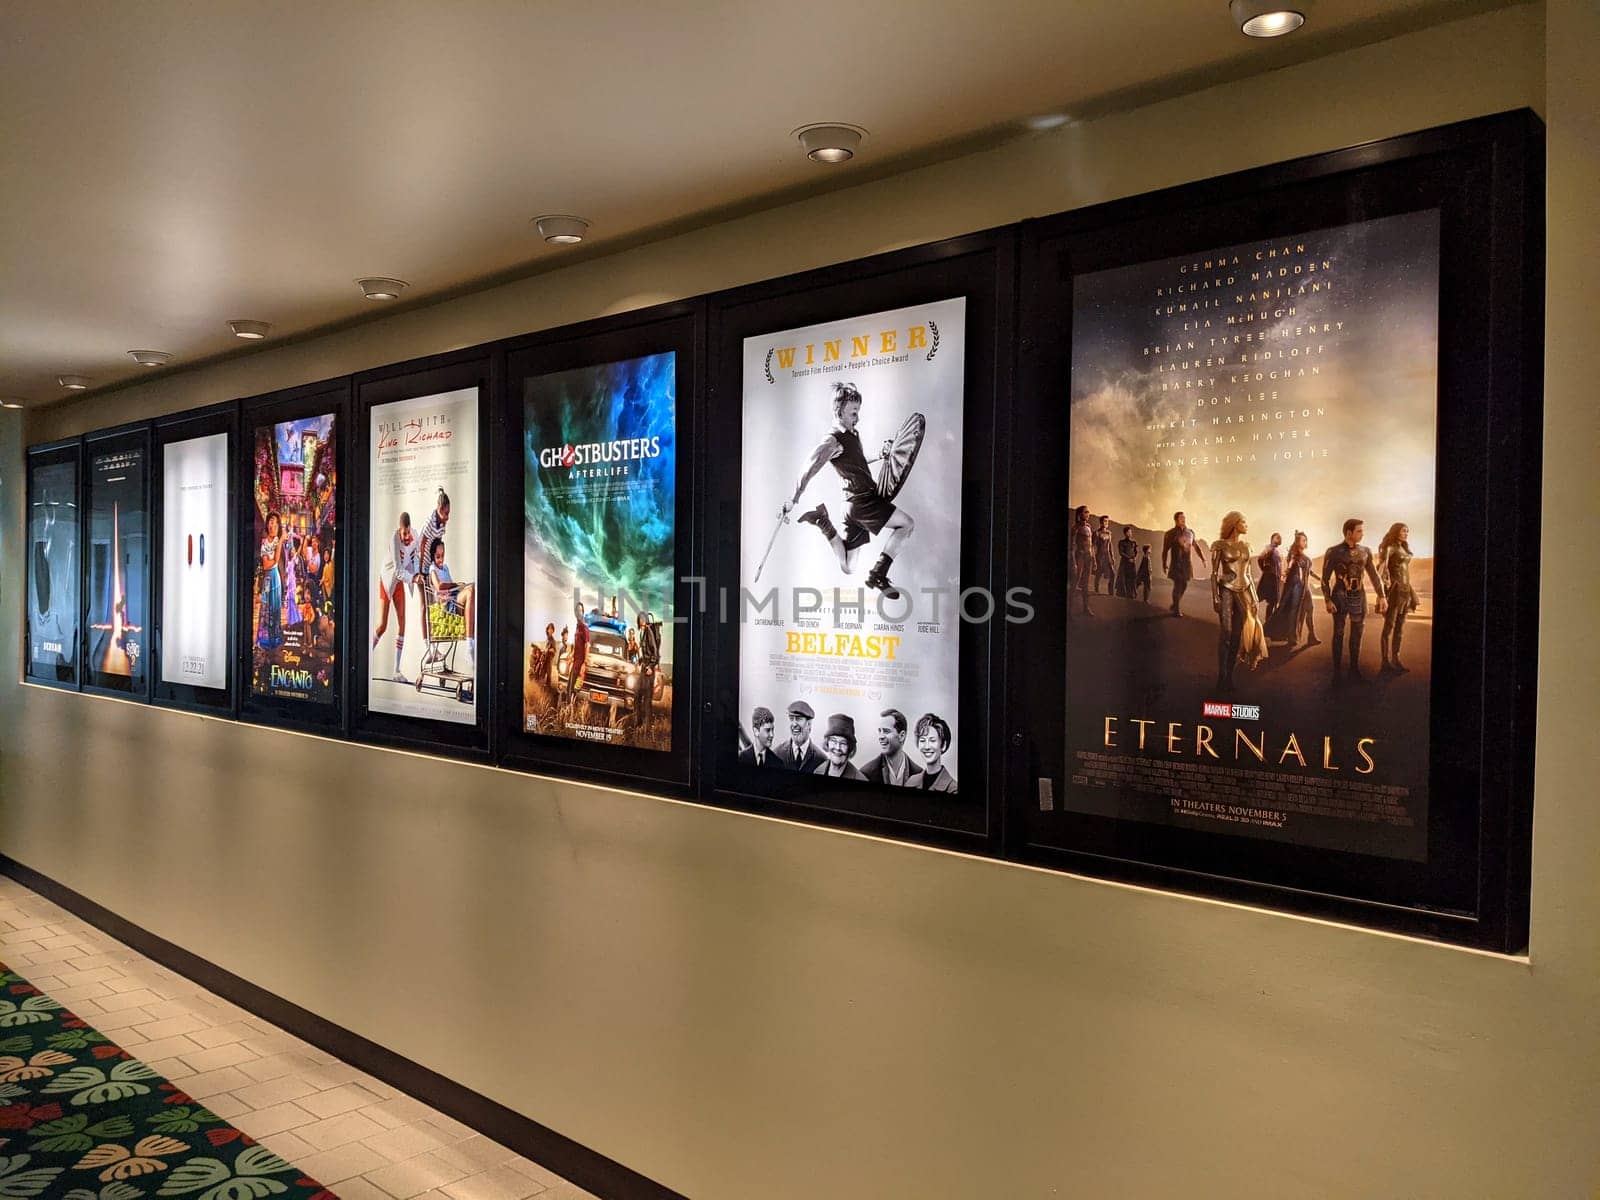 Honolulu - November 5, 2021: row of movie posters for upcoming releases in Kahala Mall, a shopping center in Honolulu, Hawaii. The photo shows the posters for the movies "Ghostbusters: Afterlife", "Belfast", "The Eternals", "King Richard", and "Encanto". The photo is taken from a close-up angle, focusing on the posters and the frames.